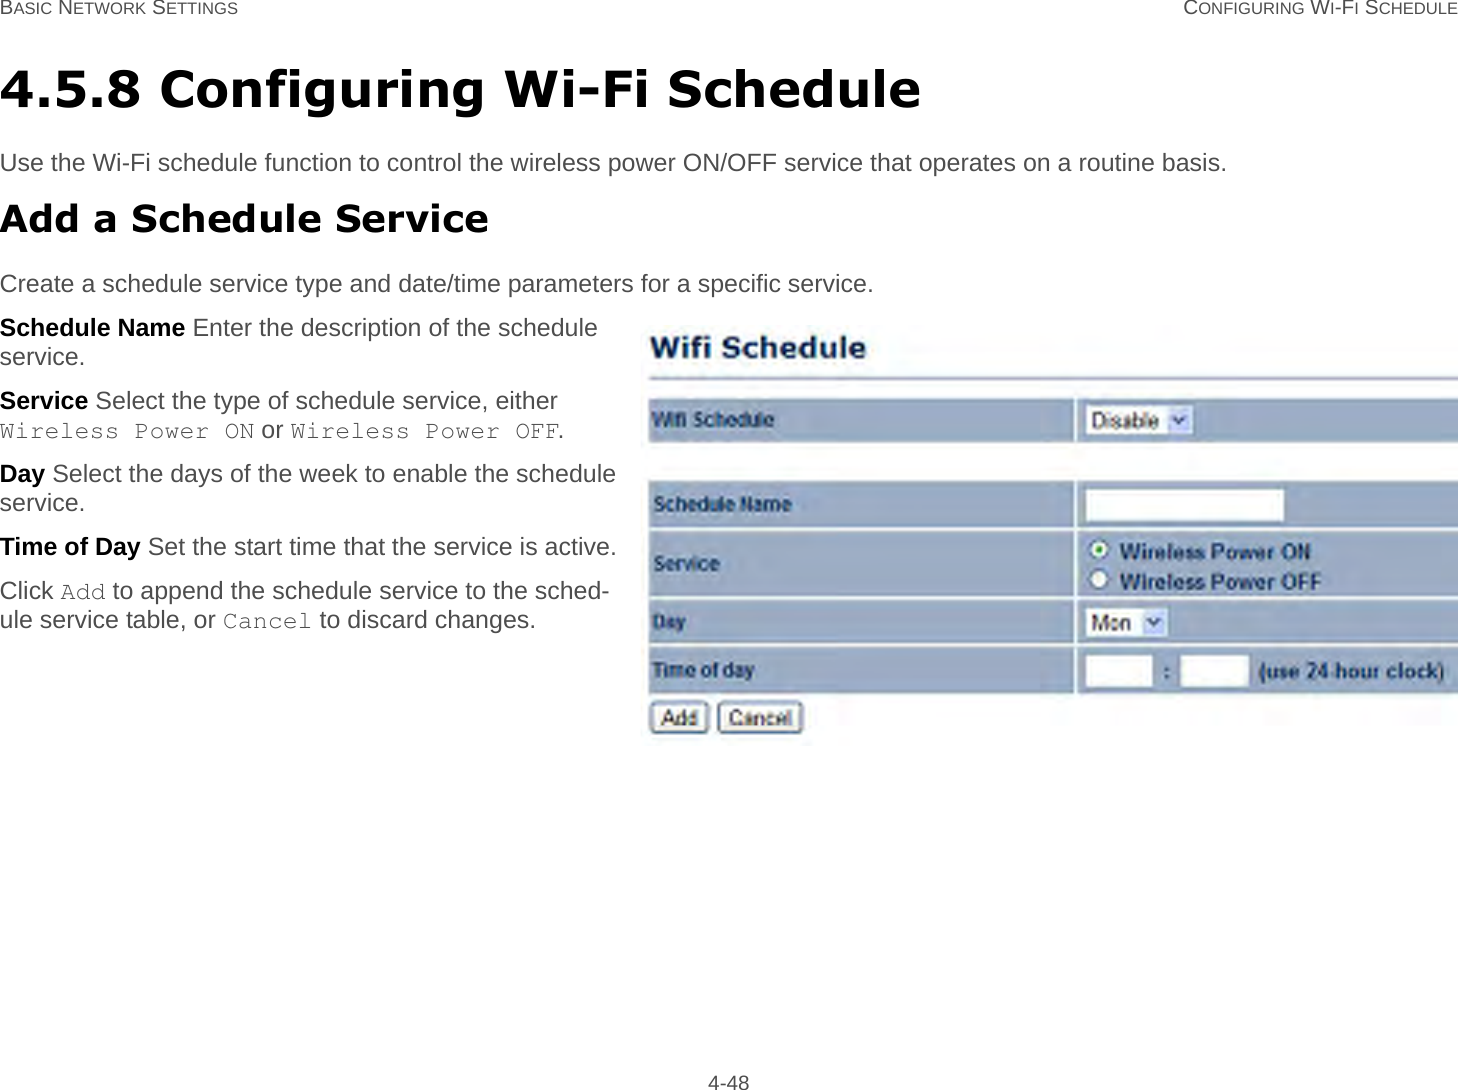 BASIC NETWORK SETTINGS CONFIGURING WI-FI SCHEDULE 4-484.5.8 Configuring Wi-Fi ScheduleUse the Wi-Fi schedule function to control the wireless power ON/OFF service that operates on a routine basis.Add a Schedule ServiceCreate a schedule service type and date/time parameters for a specific service.Schedule Name Enter the description of the schedule service.Service Select the type of schedule service, either Wireless Power ON or Wireless Power OFF.Day Select the days of the week to enable the schedule service.Time of Day Set the start time that the service is active.Click Add to append the schedule service to the sched-ule service table, or Cancel to discard changes.